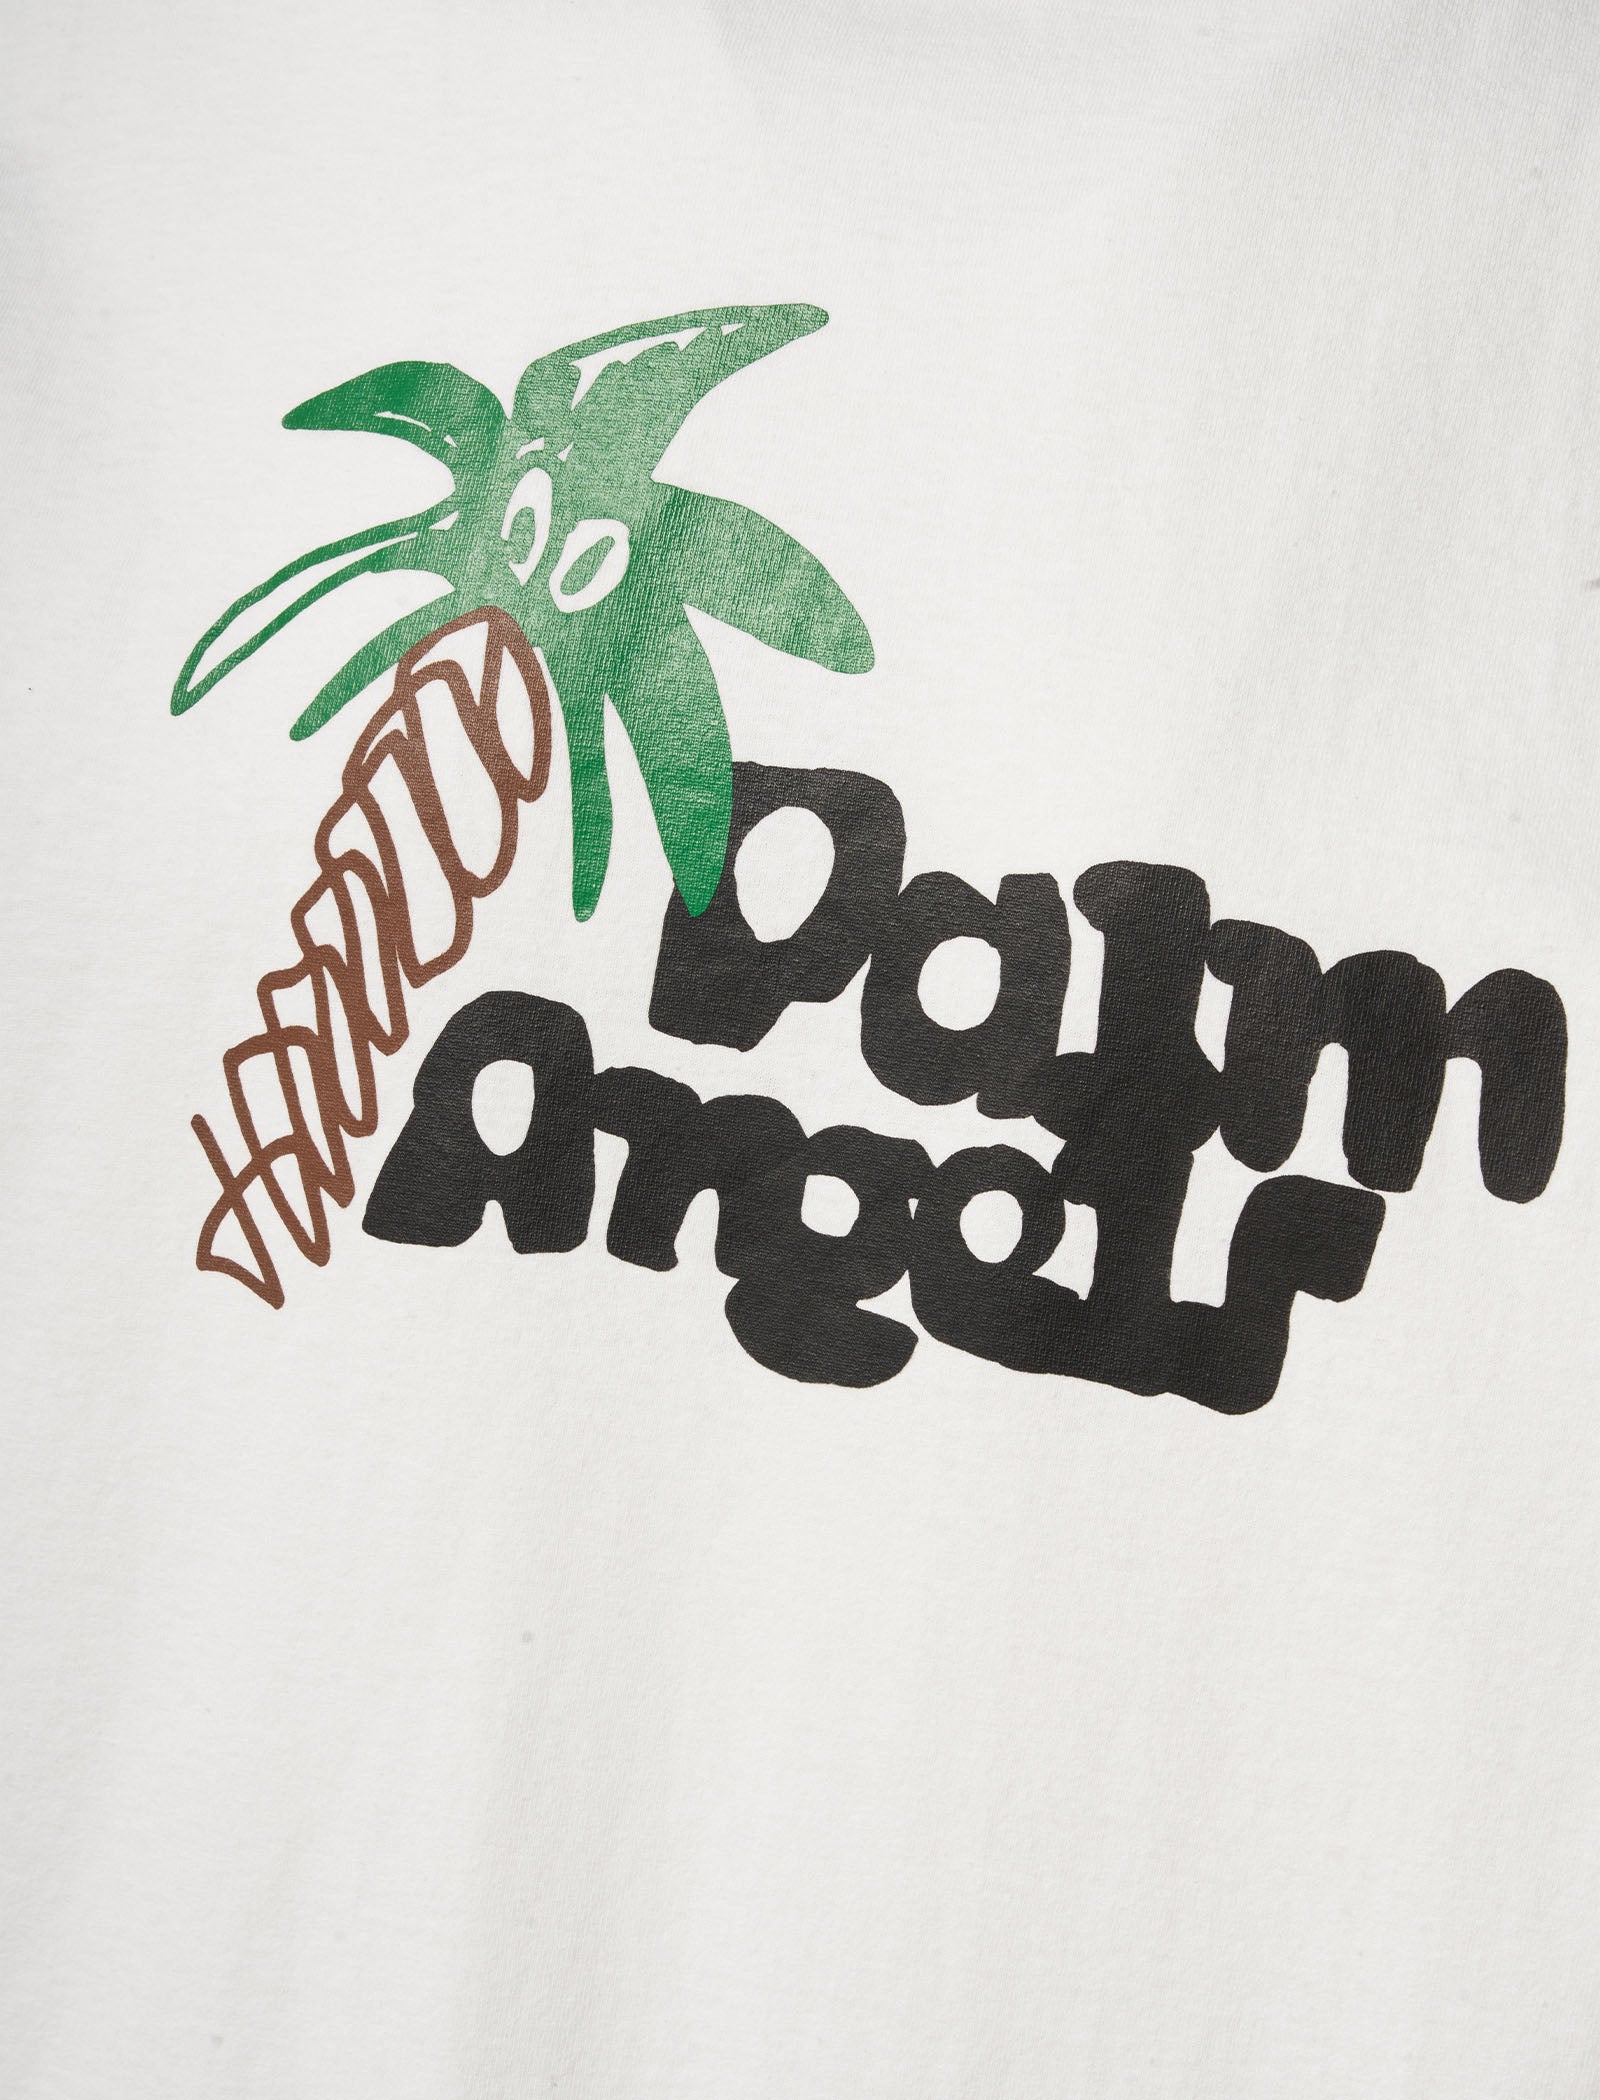 PALM ANGELS SKETCHY CLASSIC TEE